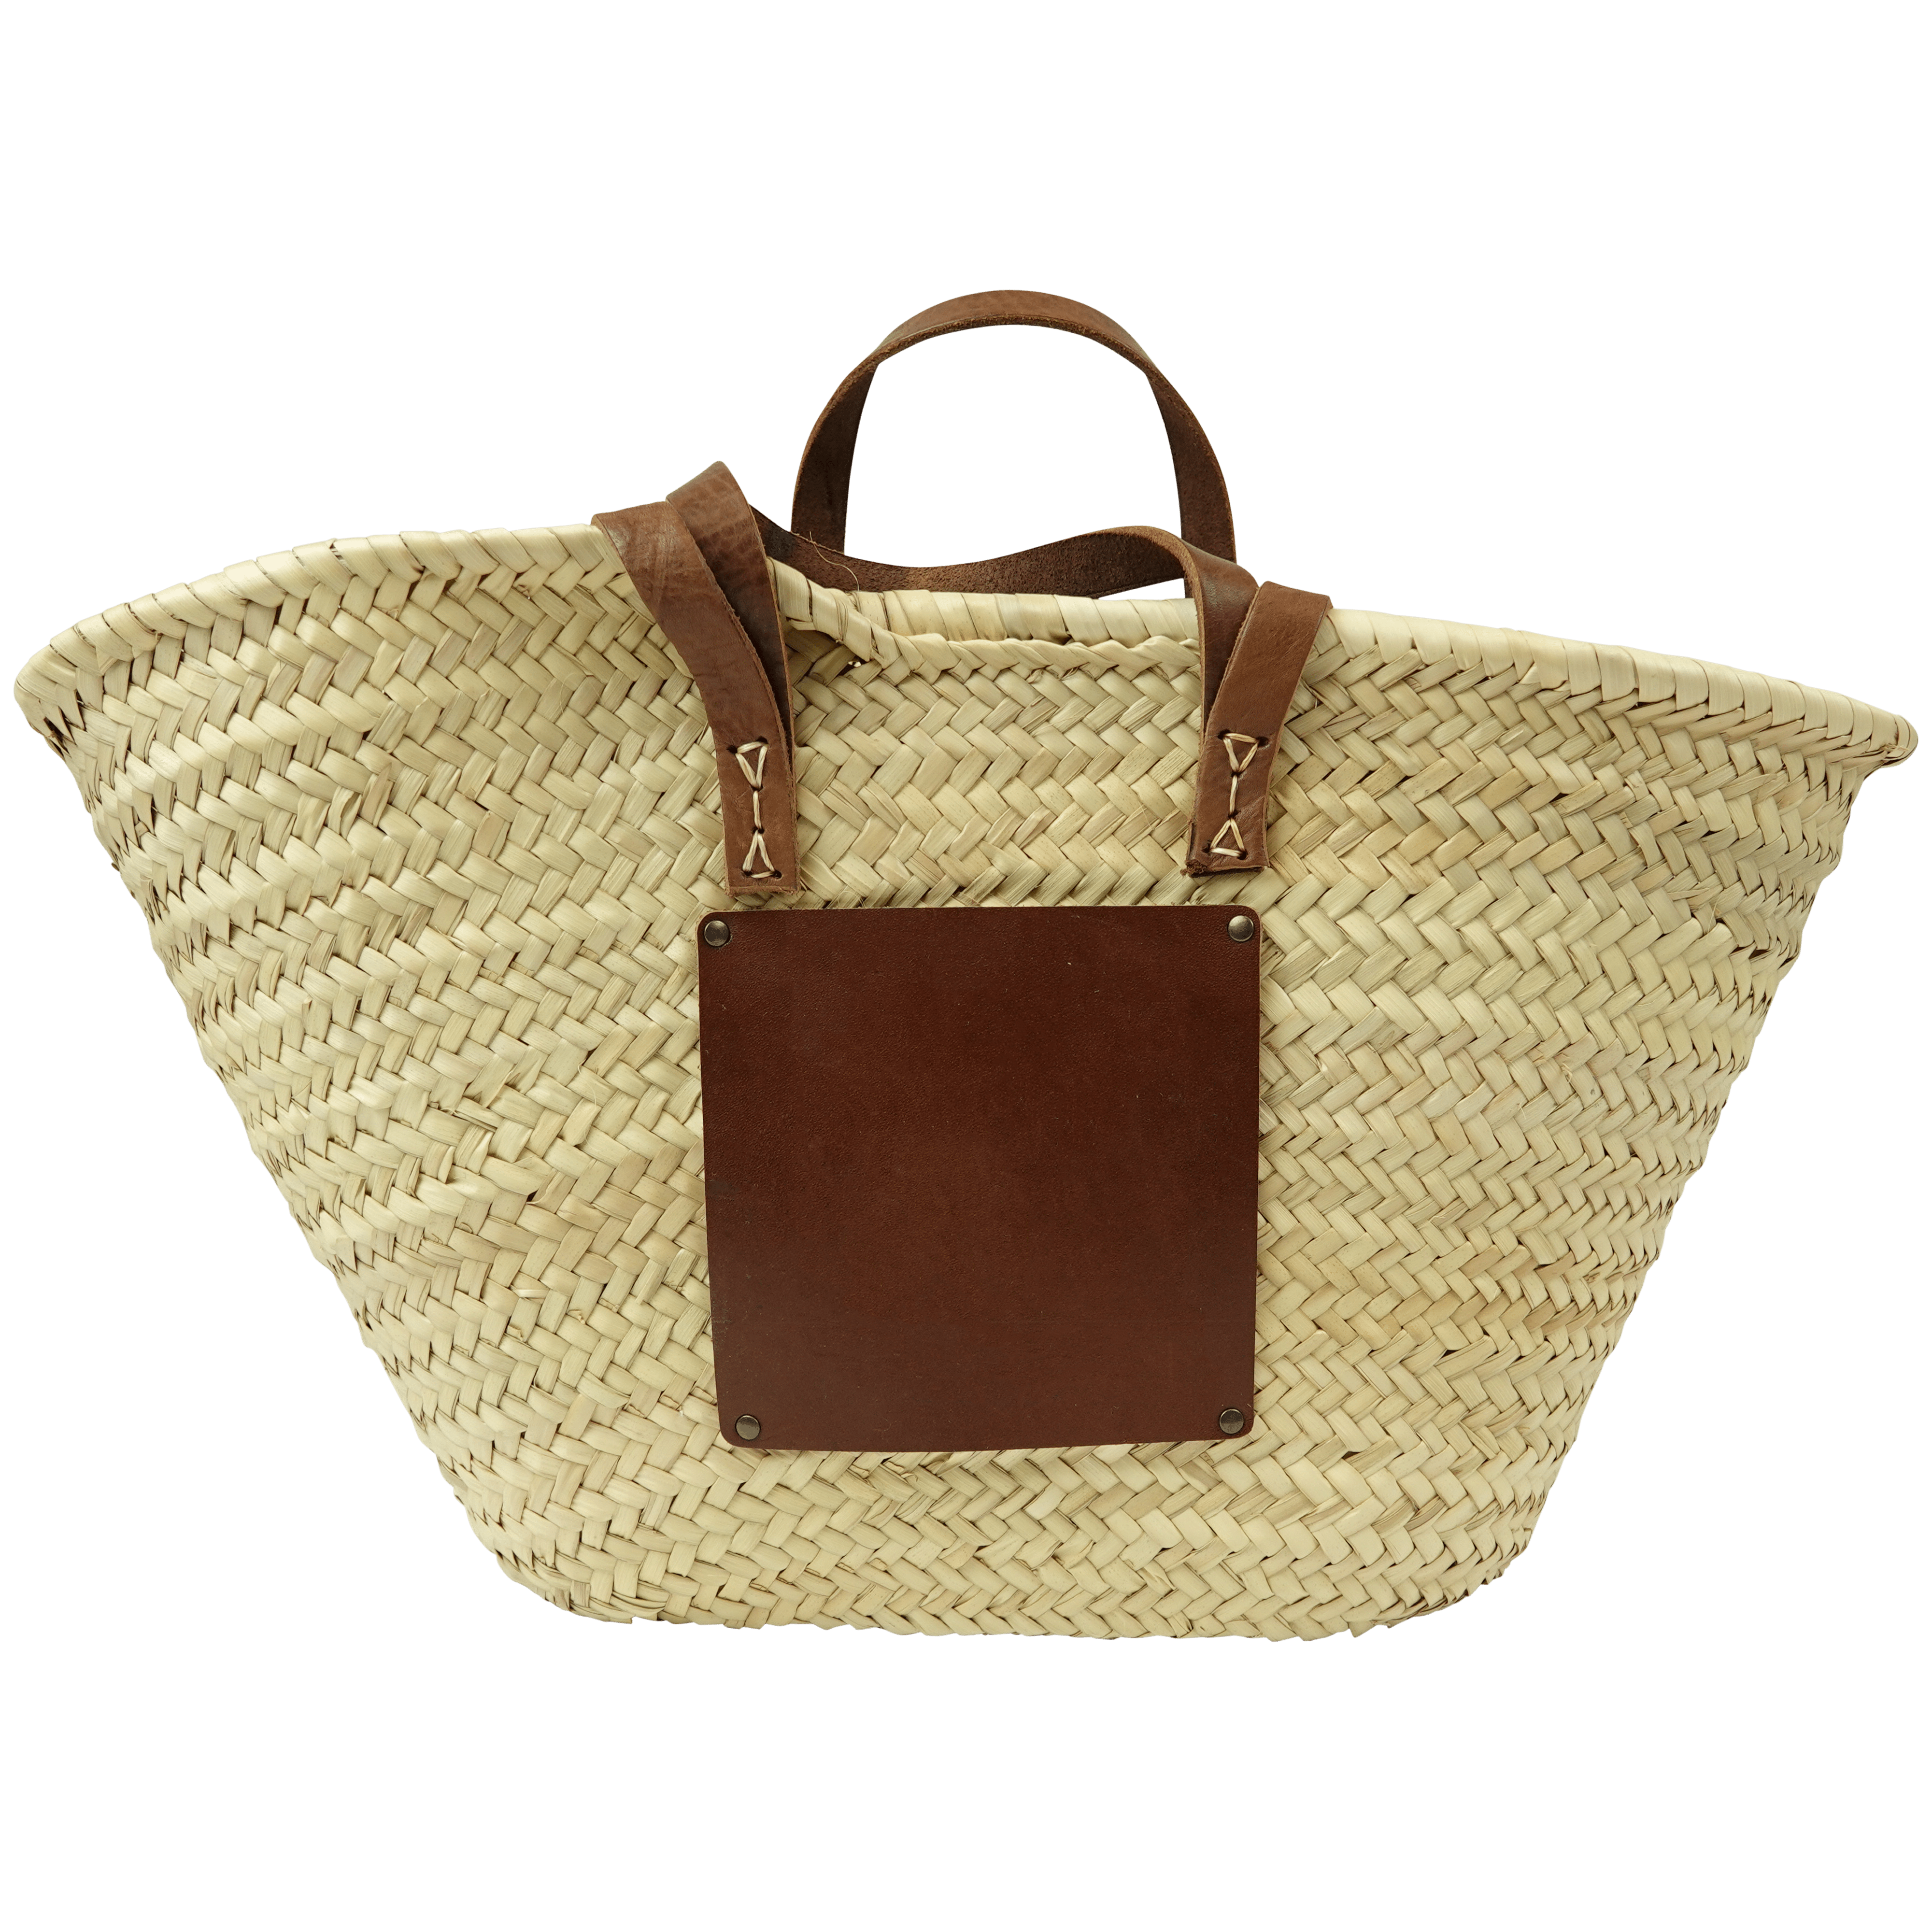 Wicker beach bag with name